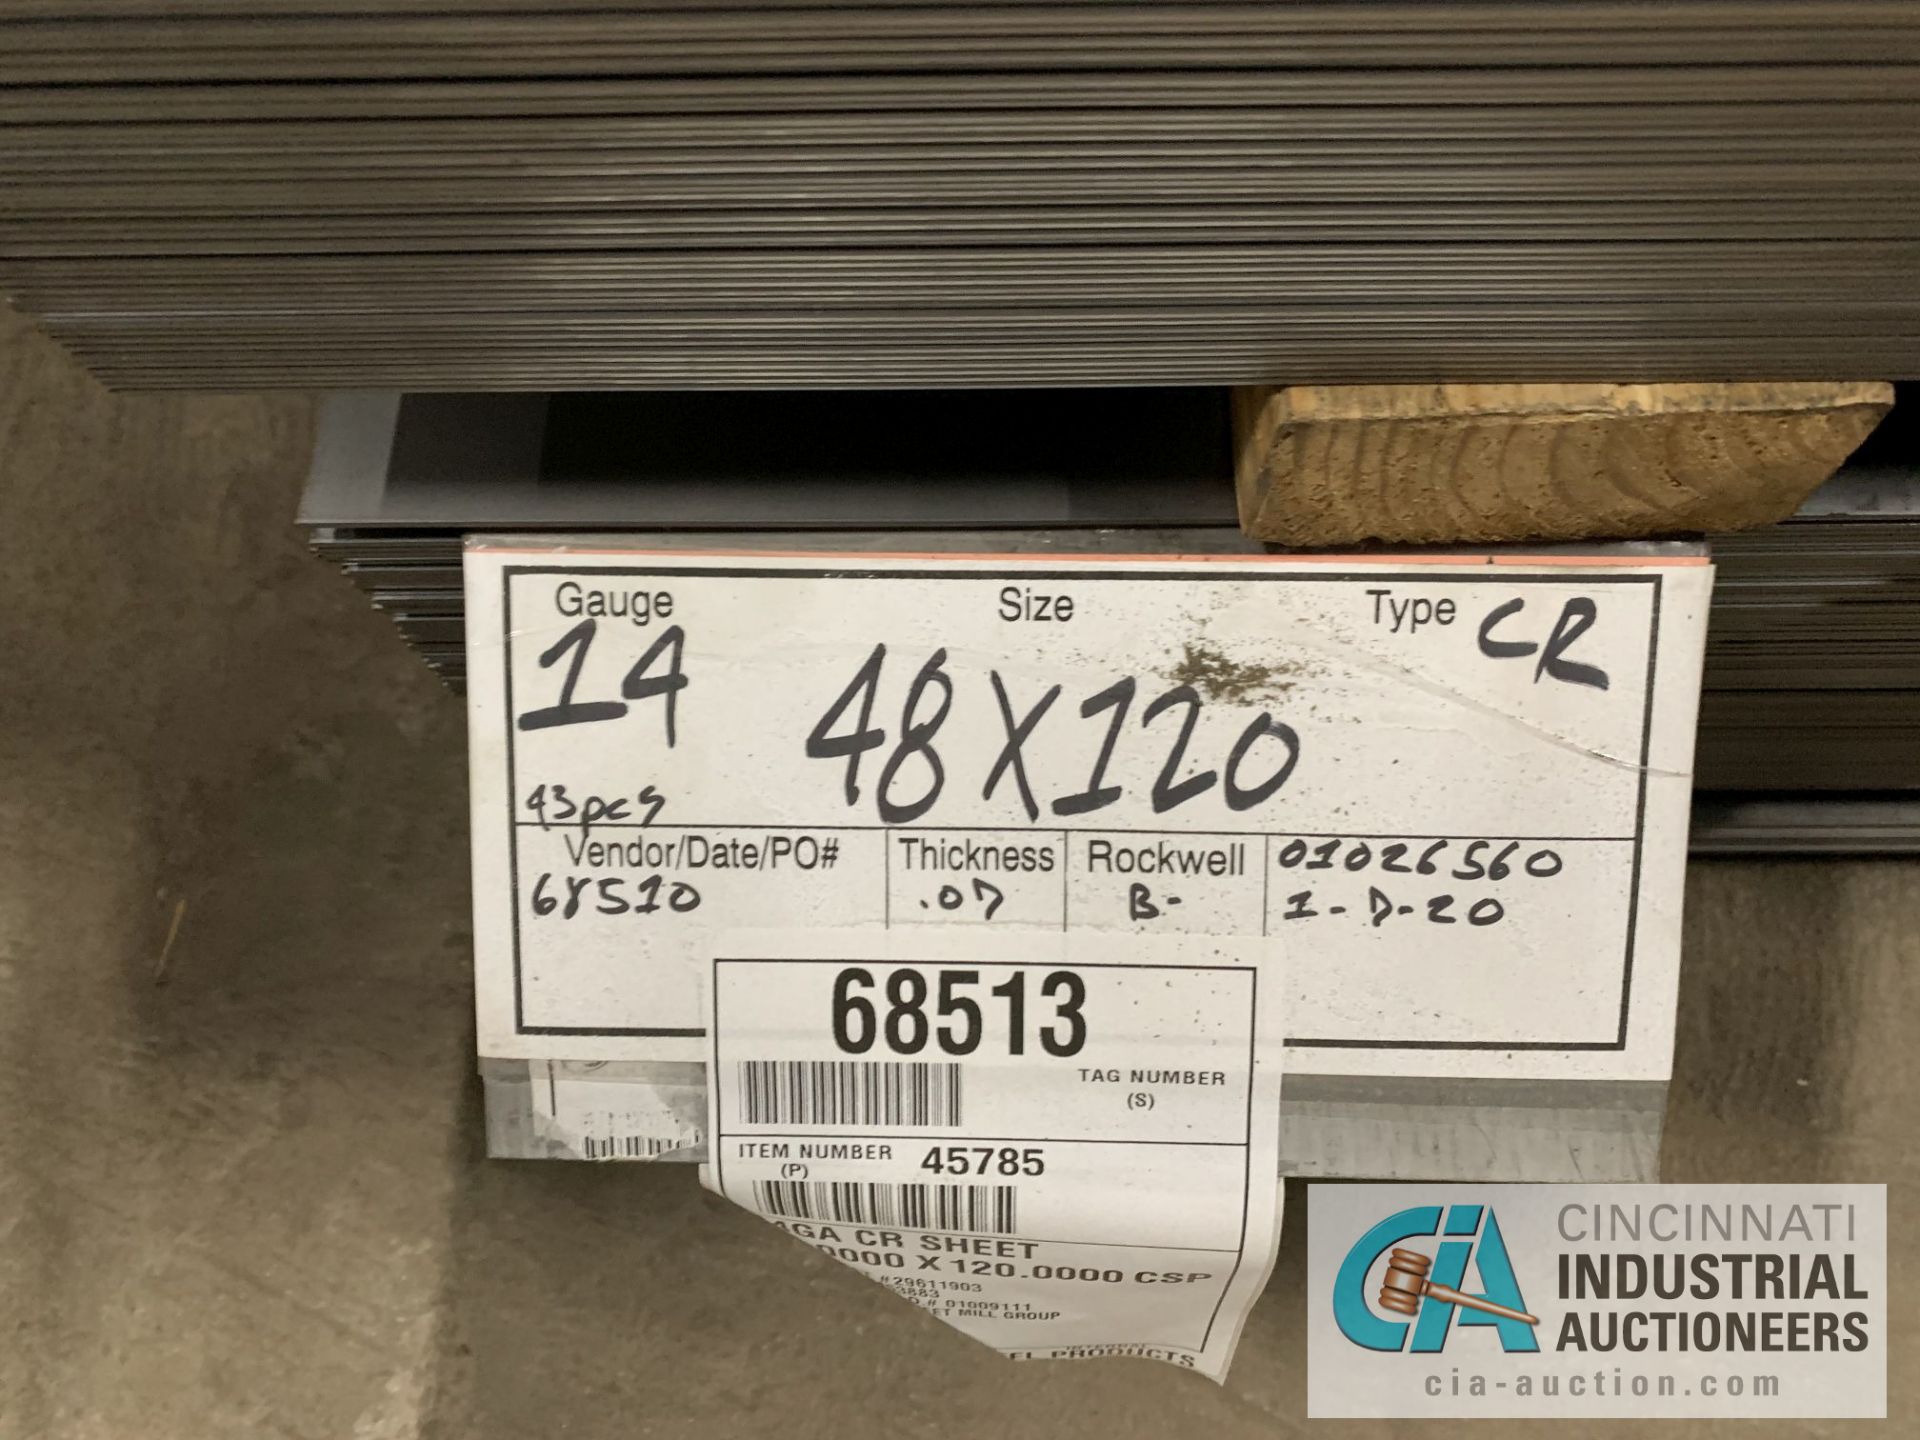 (LOT) APPROX. 19,125 LBS. UNCOATED SHEET STEEL, 1-STACK, 4-BUNDLES, SEE INVENTORY FOR LISTING. - Image 3 of 5